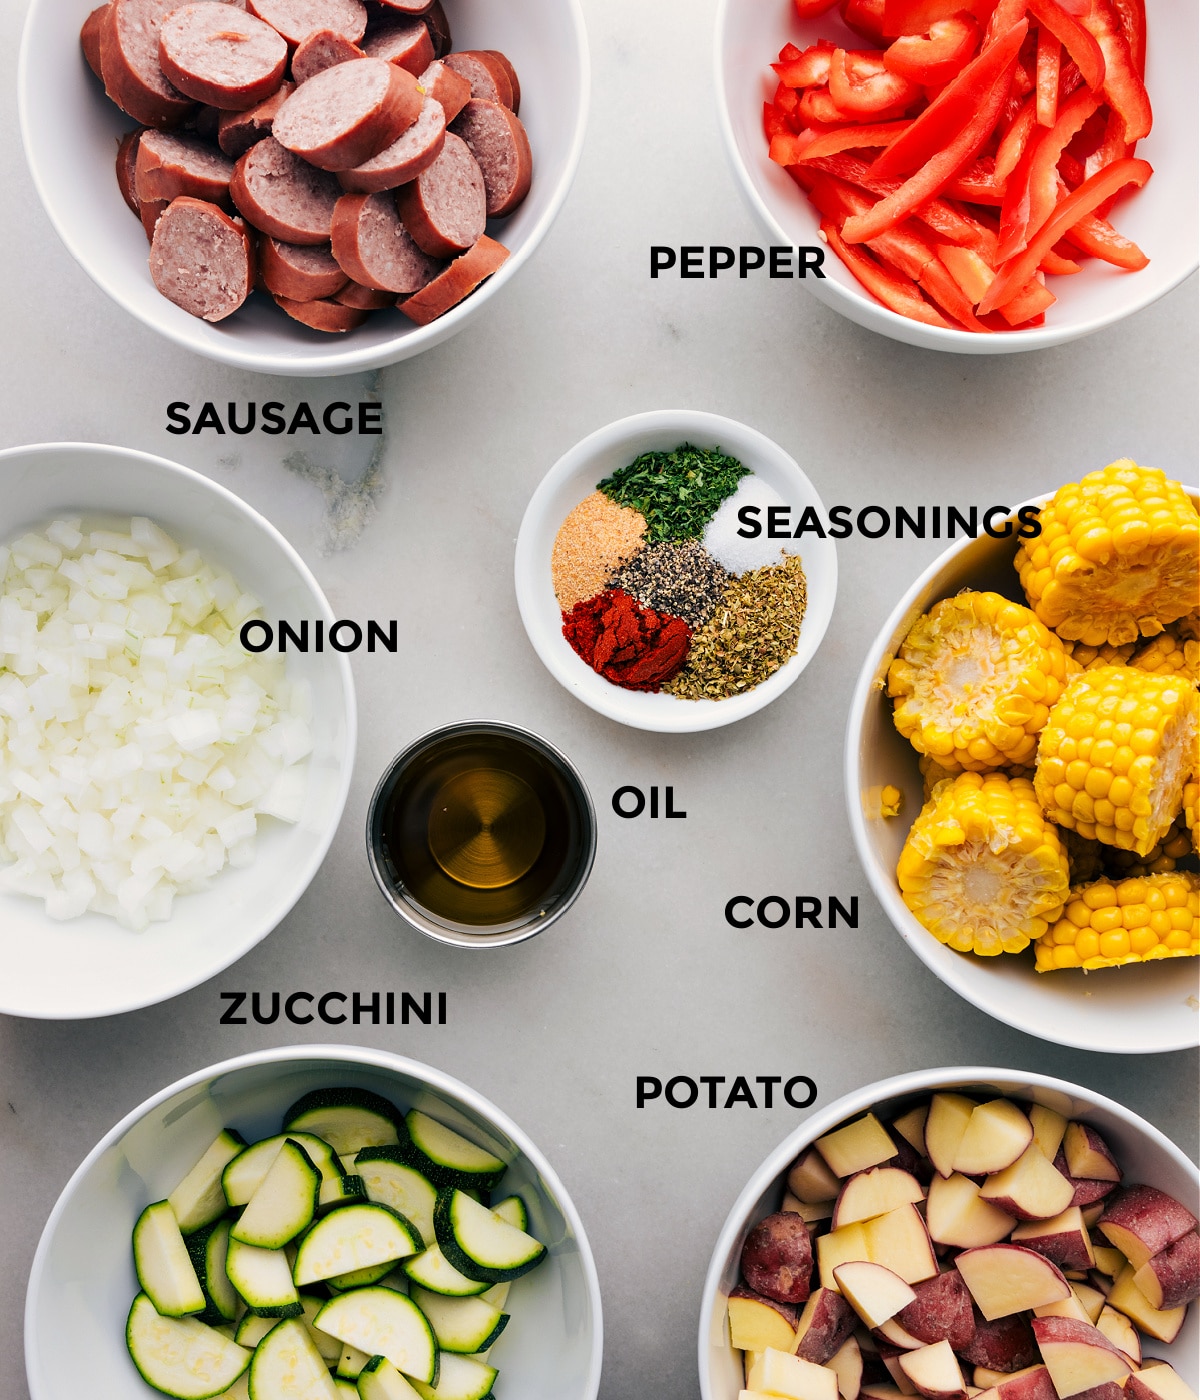 All the ingredients in this recipe including sausage, pepper, onion, seasoning, corn, zucchini, potato, and oil prepped out for easy assembly.